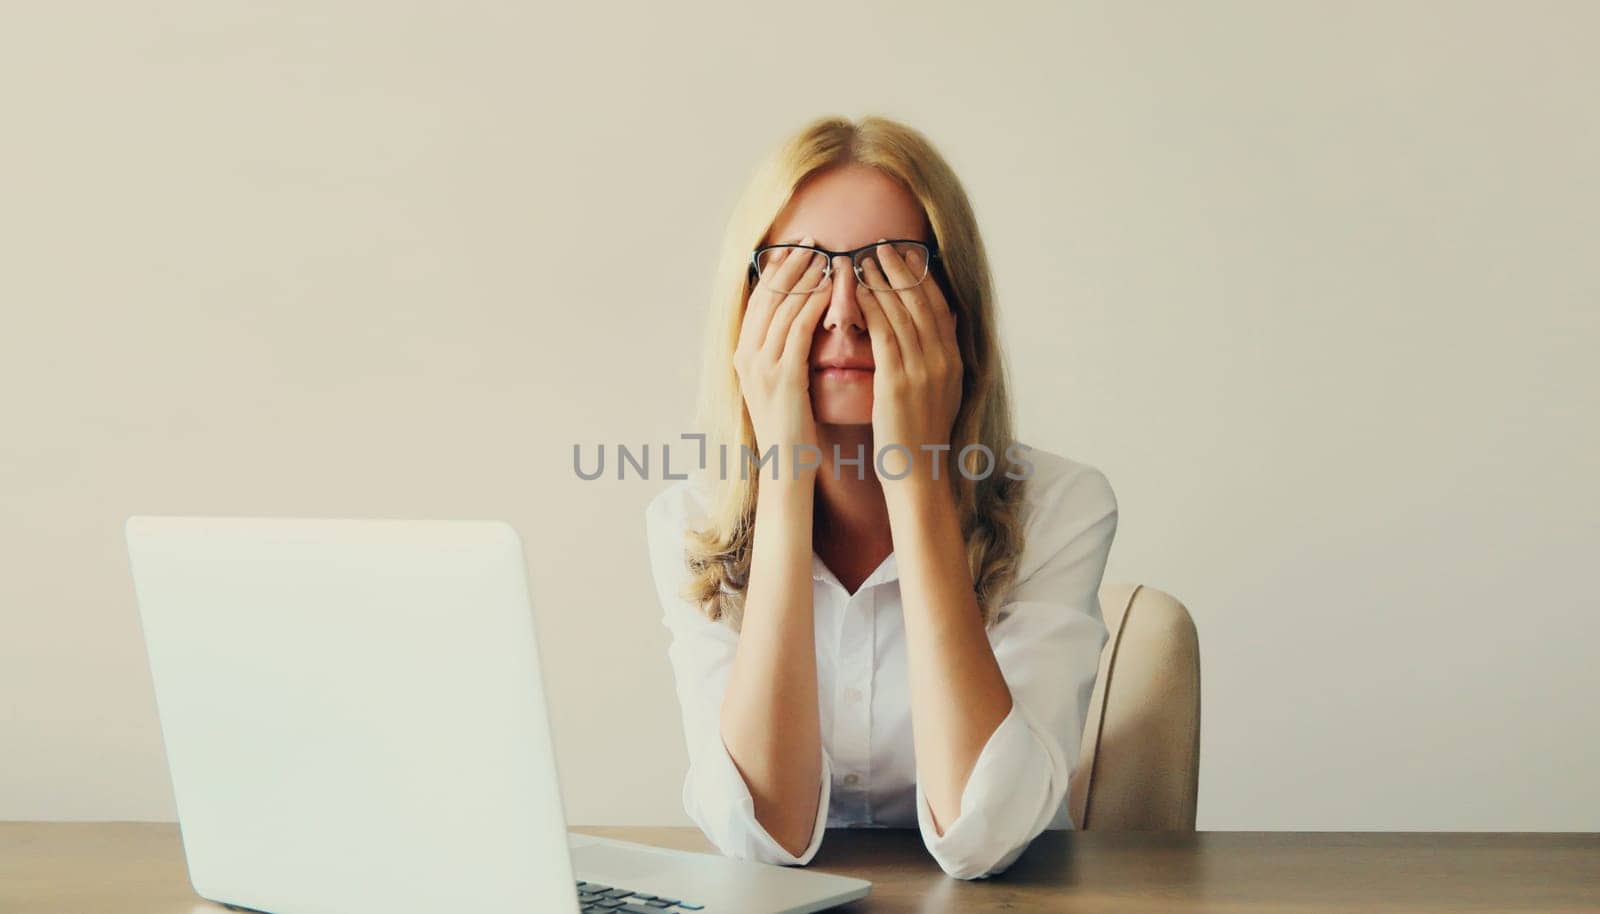 Tired overworked woman employee suffering from headache, rubbing her dry eyes, working with laptop sitting at desk in office